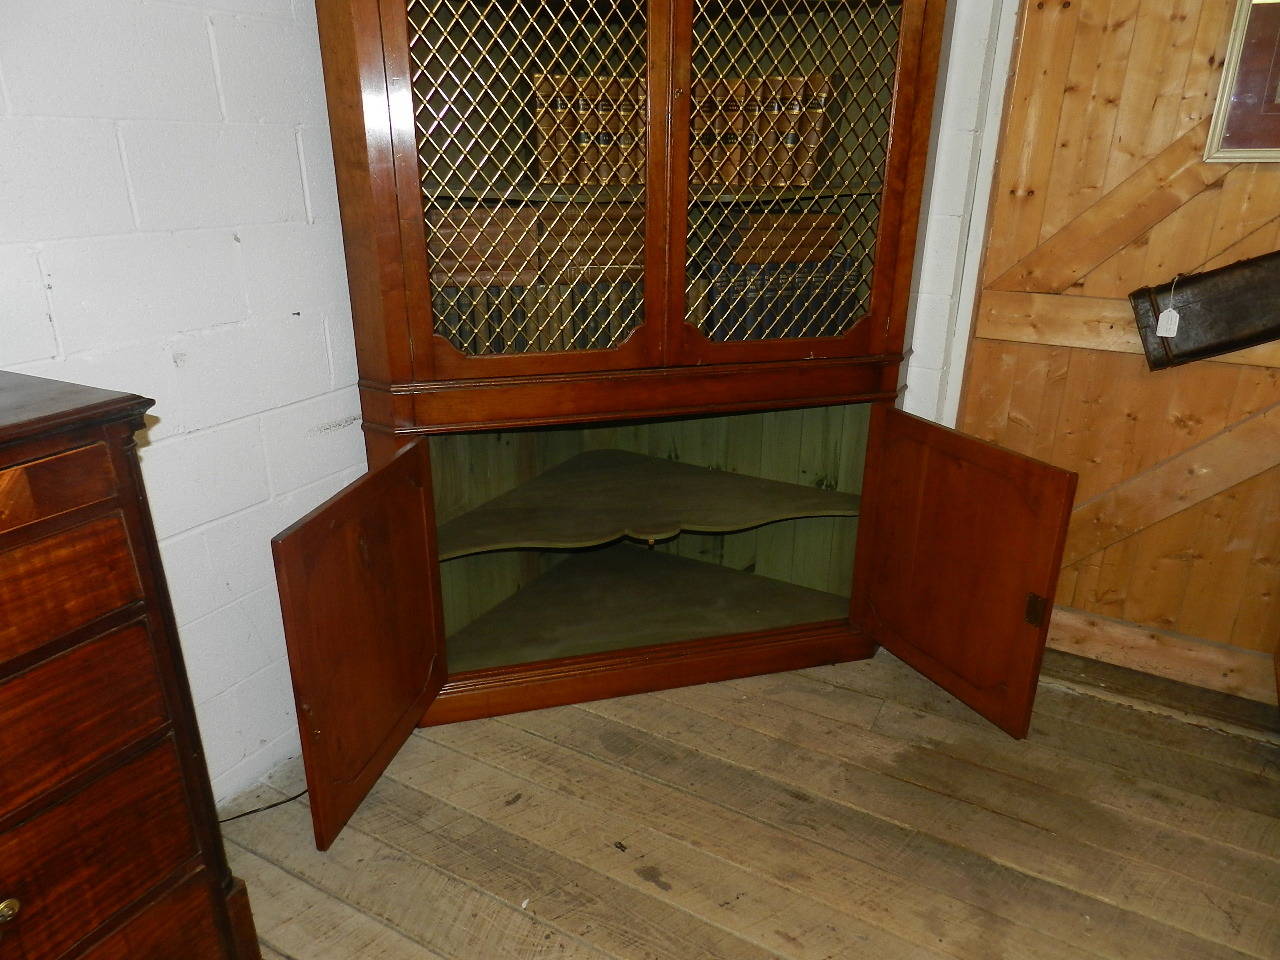 Handmade solid cherry corner cupboard. The base section has two paneled doors and the upper has panels of brass grille. The upper section has two scallop shaped shelves and would house a 50' inch widescreen T.V. (with slight adaption). It is